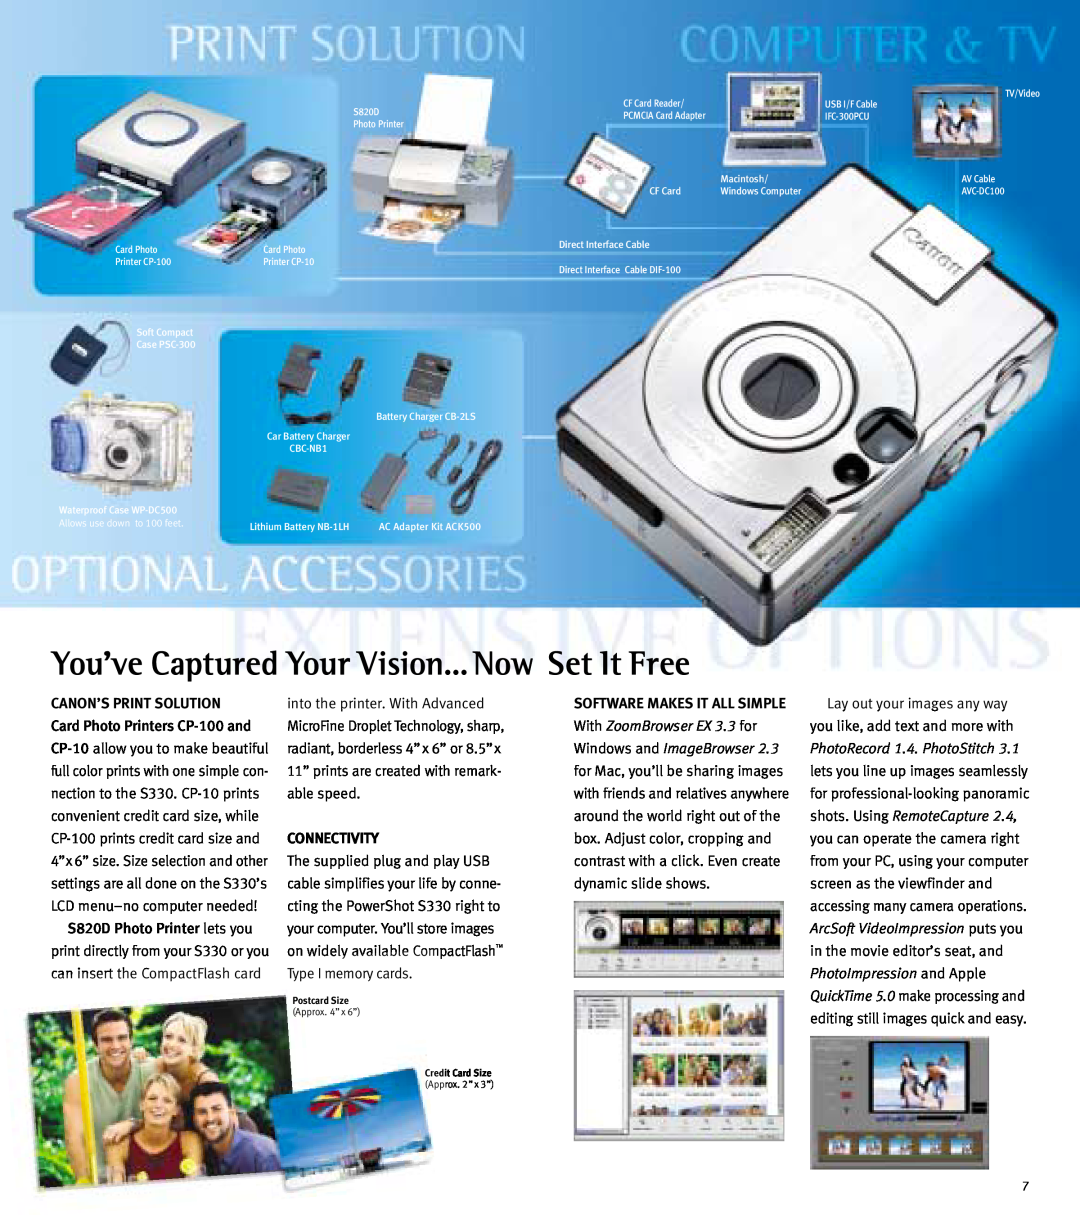 Canon 330 specifications Canon’S Print Solution, Card Photo Printers CP-100 and, Connectivity, S820D Photo Printer lets you 